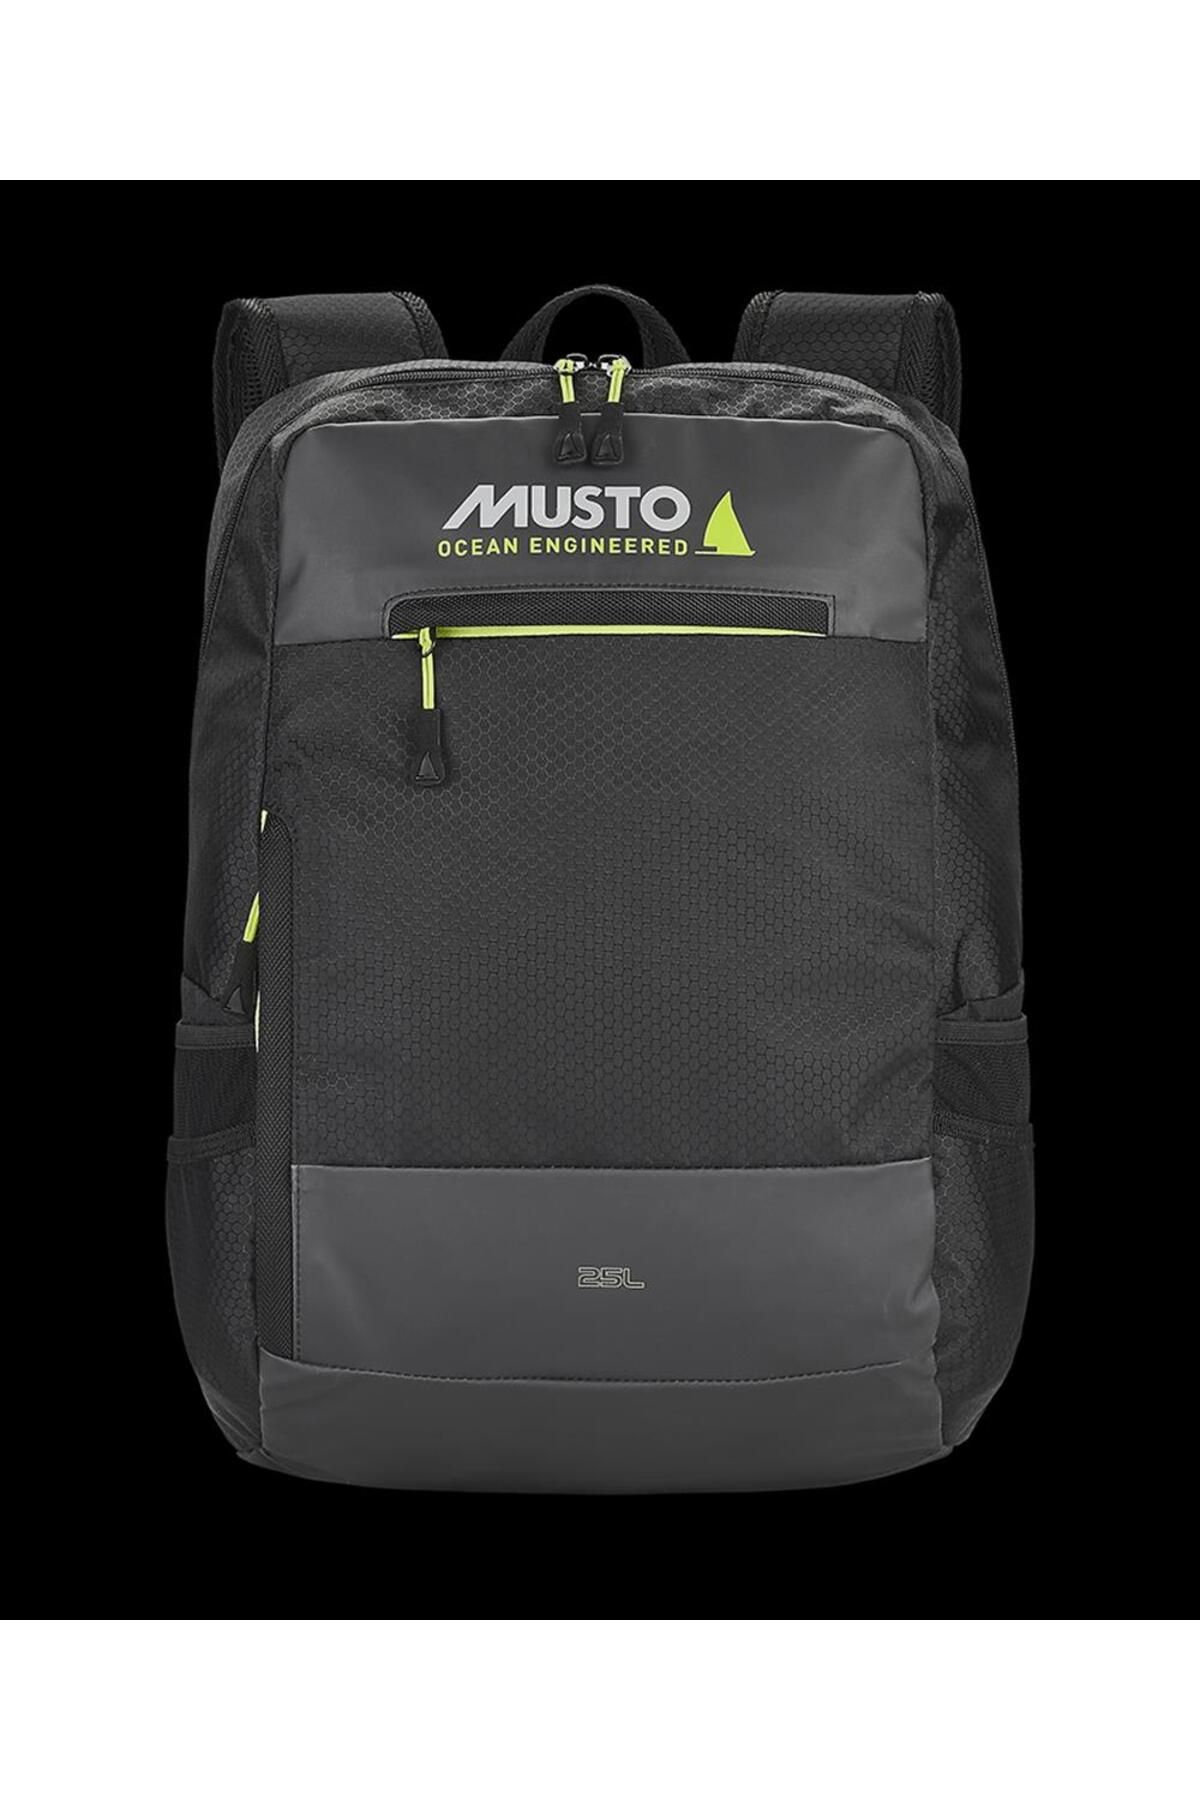 Musto Ess Backpack 25l (MUS.AUBL00220)